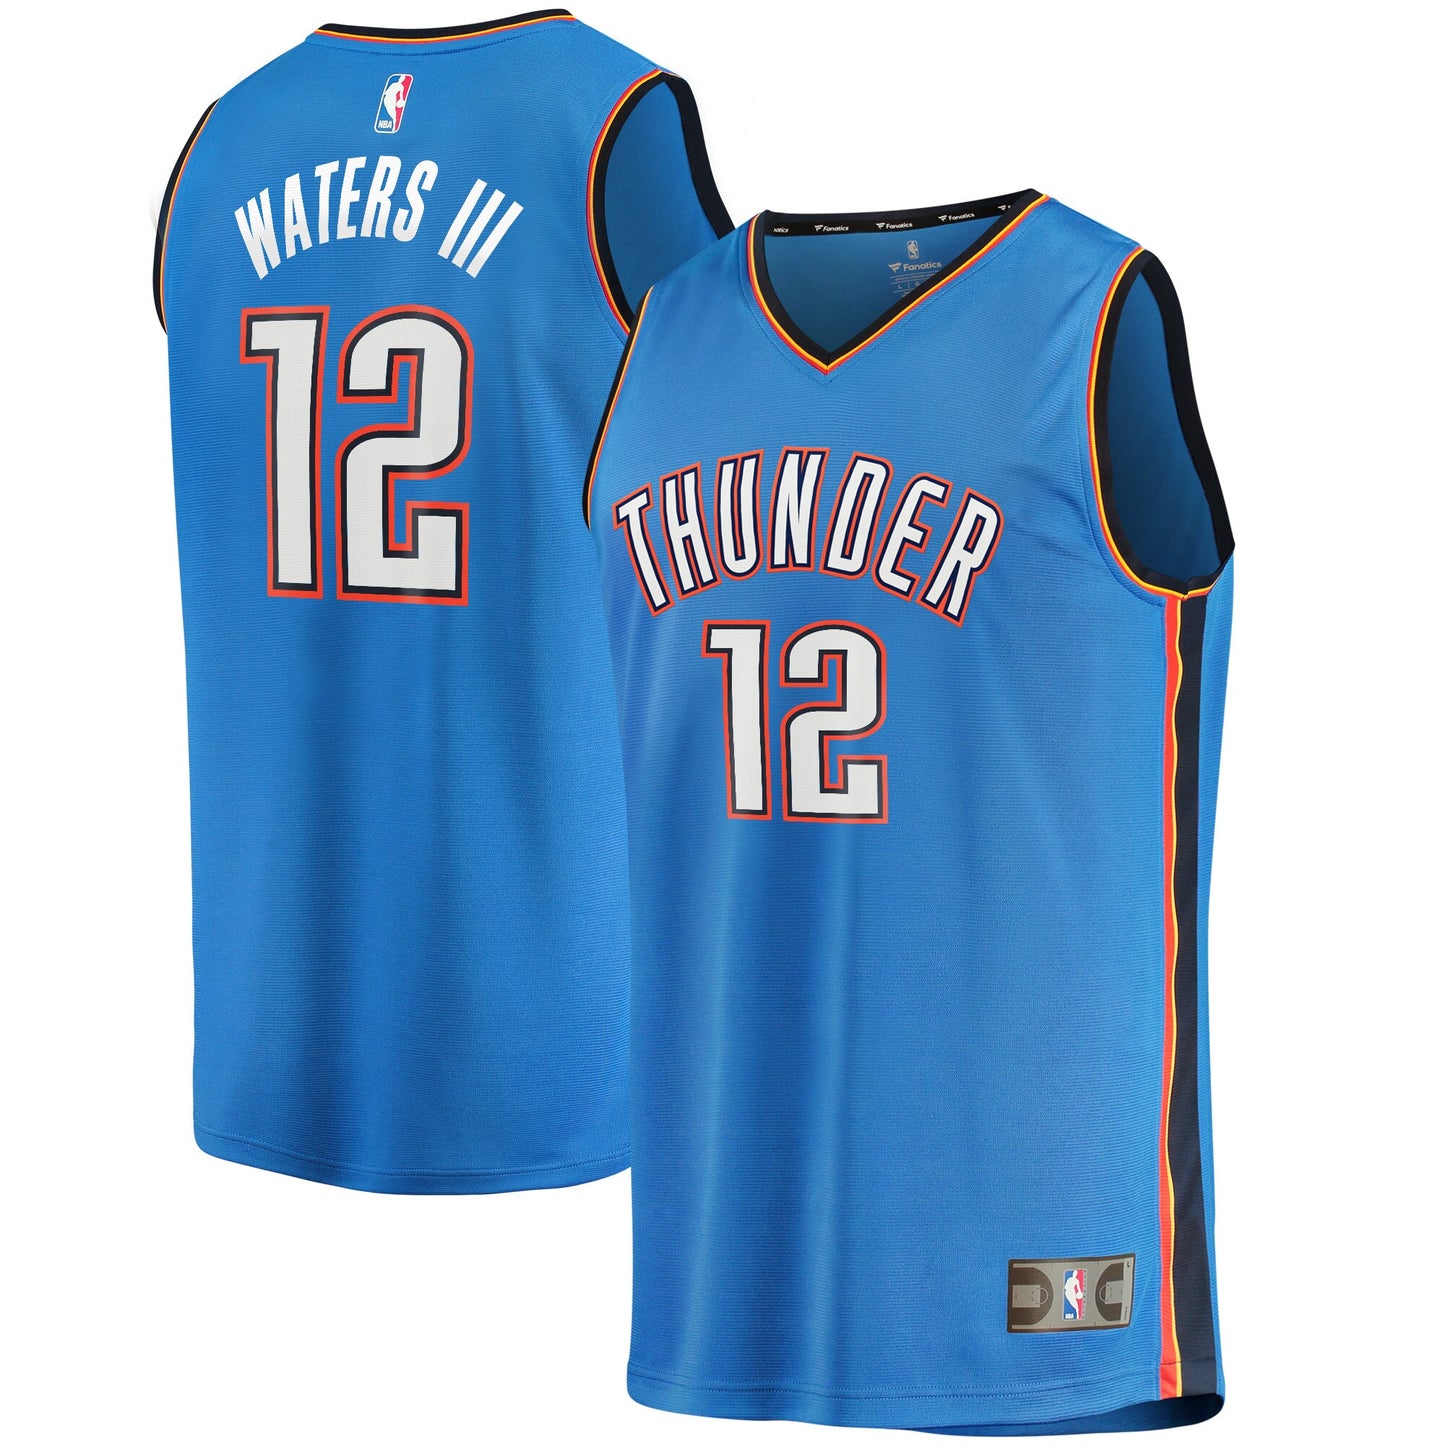 Lindy Waters III Oklahoma City Thunder Fanatics Branded Fast Break Player Jersey - Icon Edition - Blue